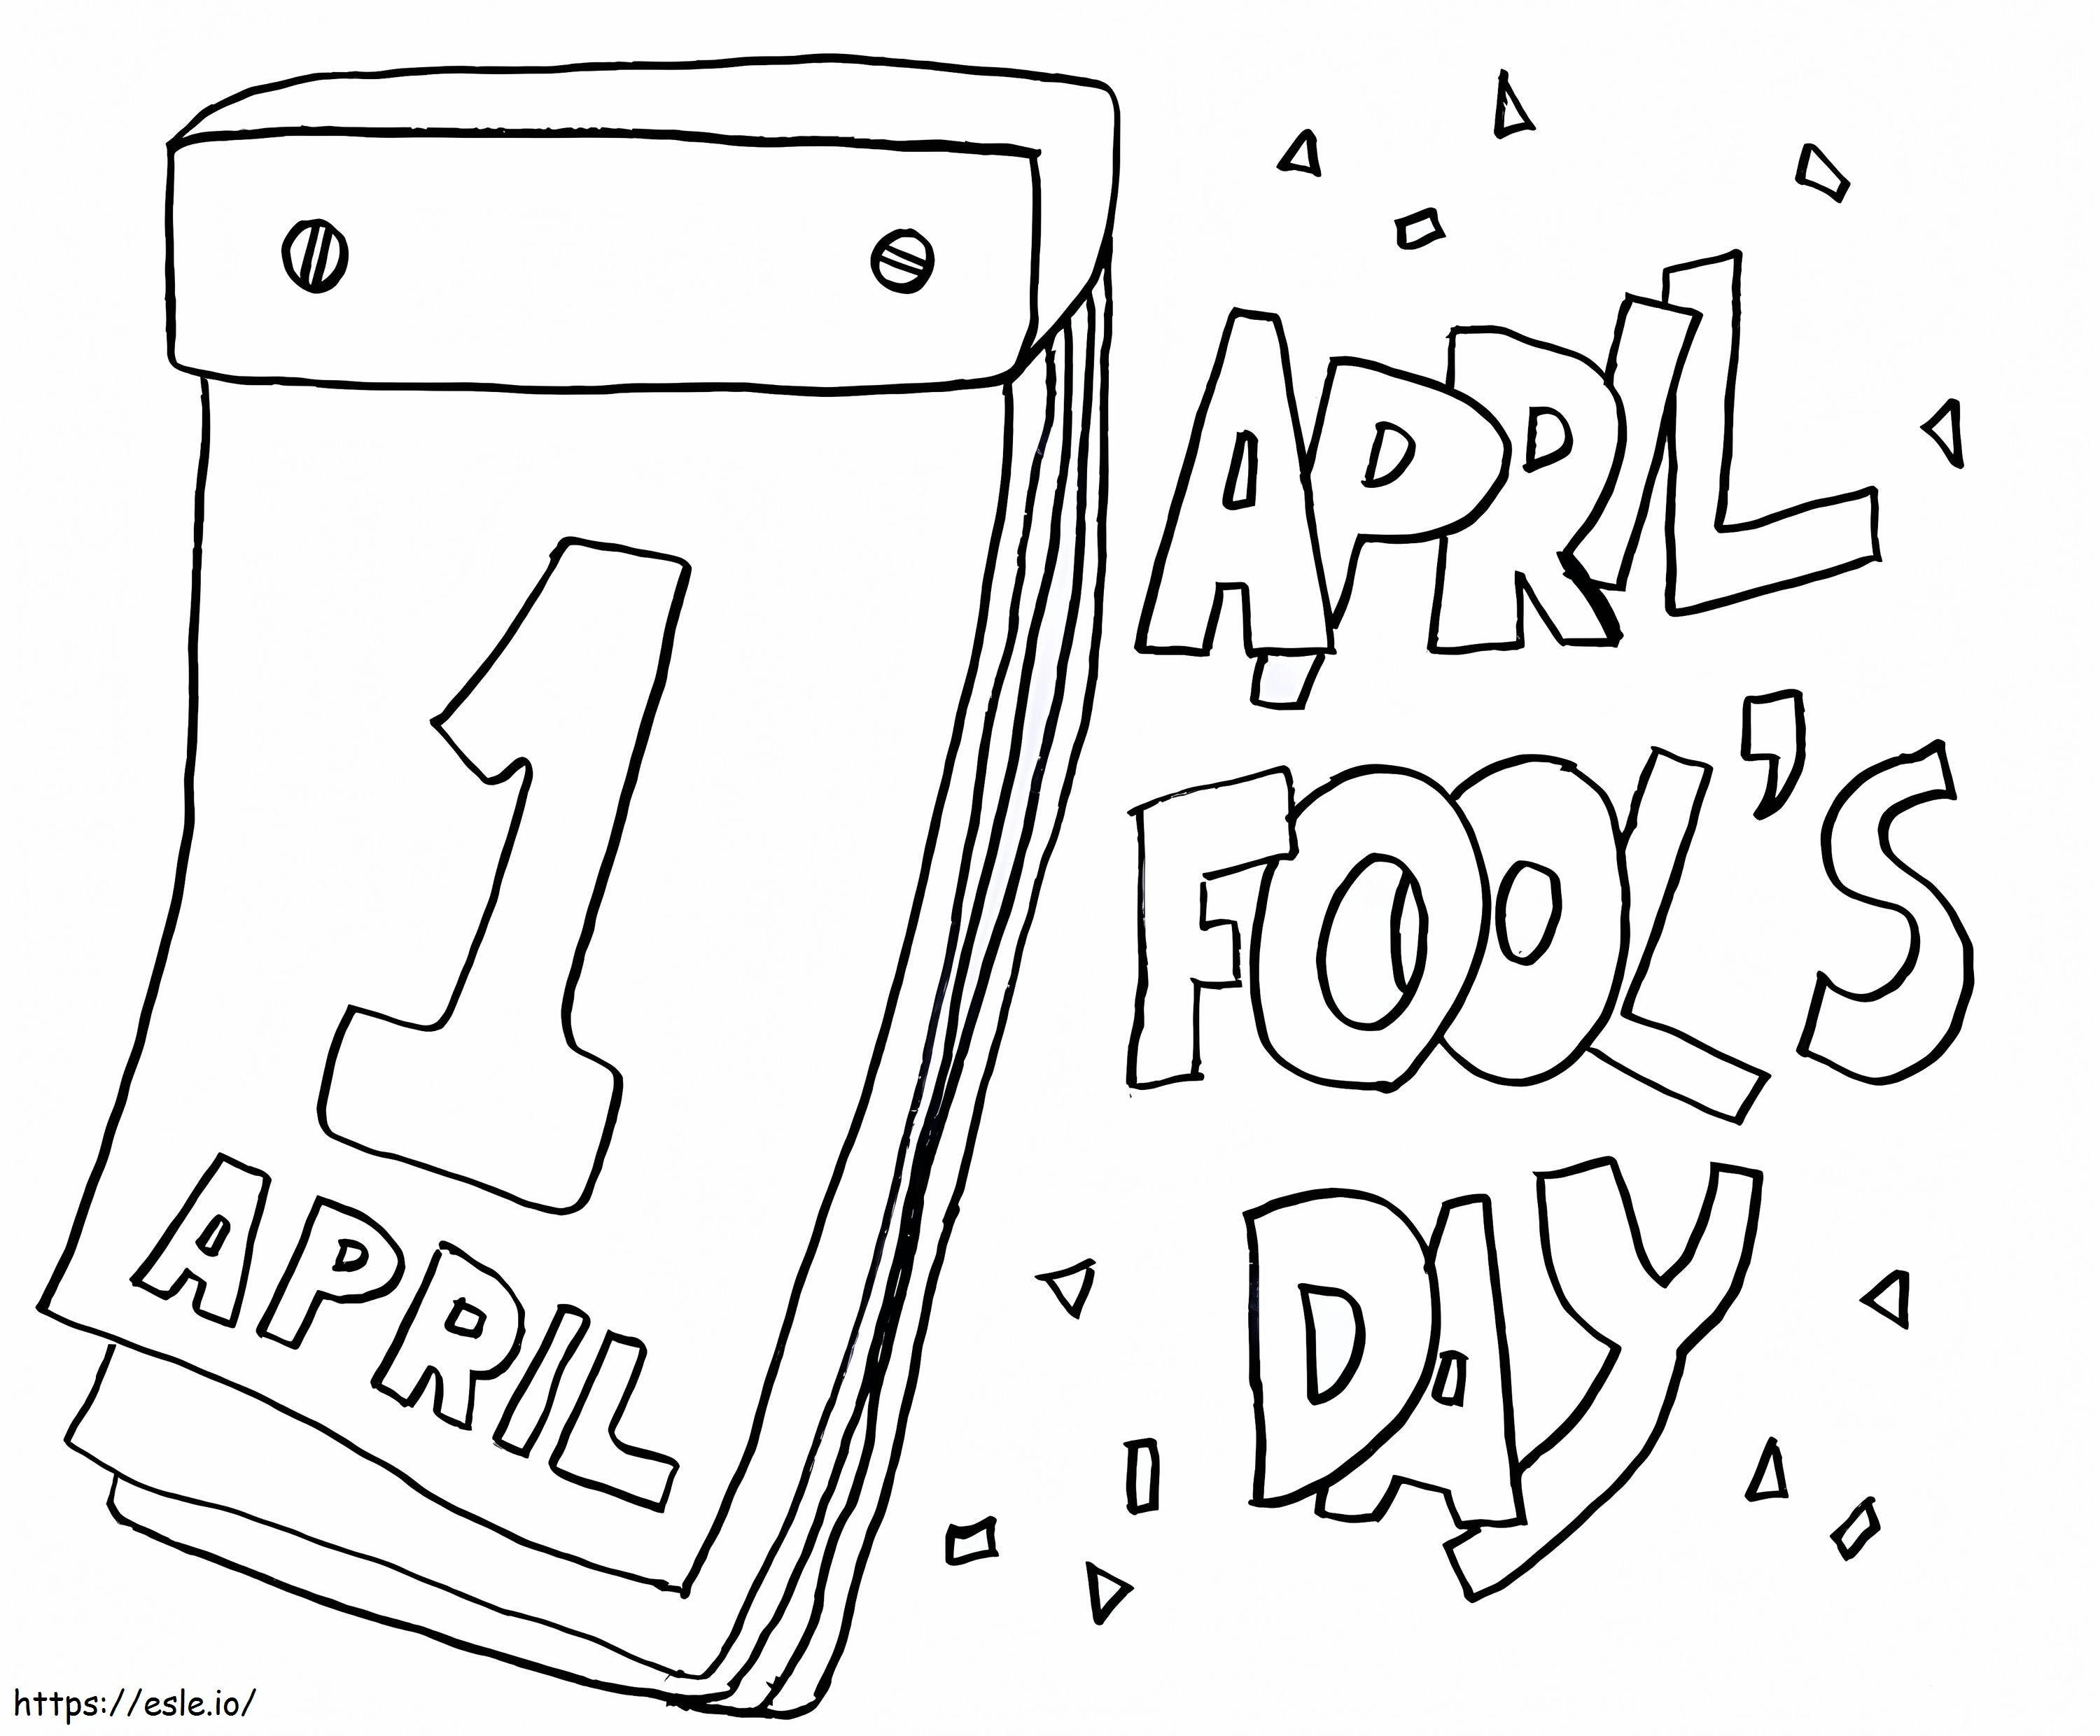 April Fools Day coloring page